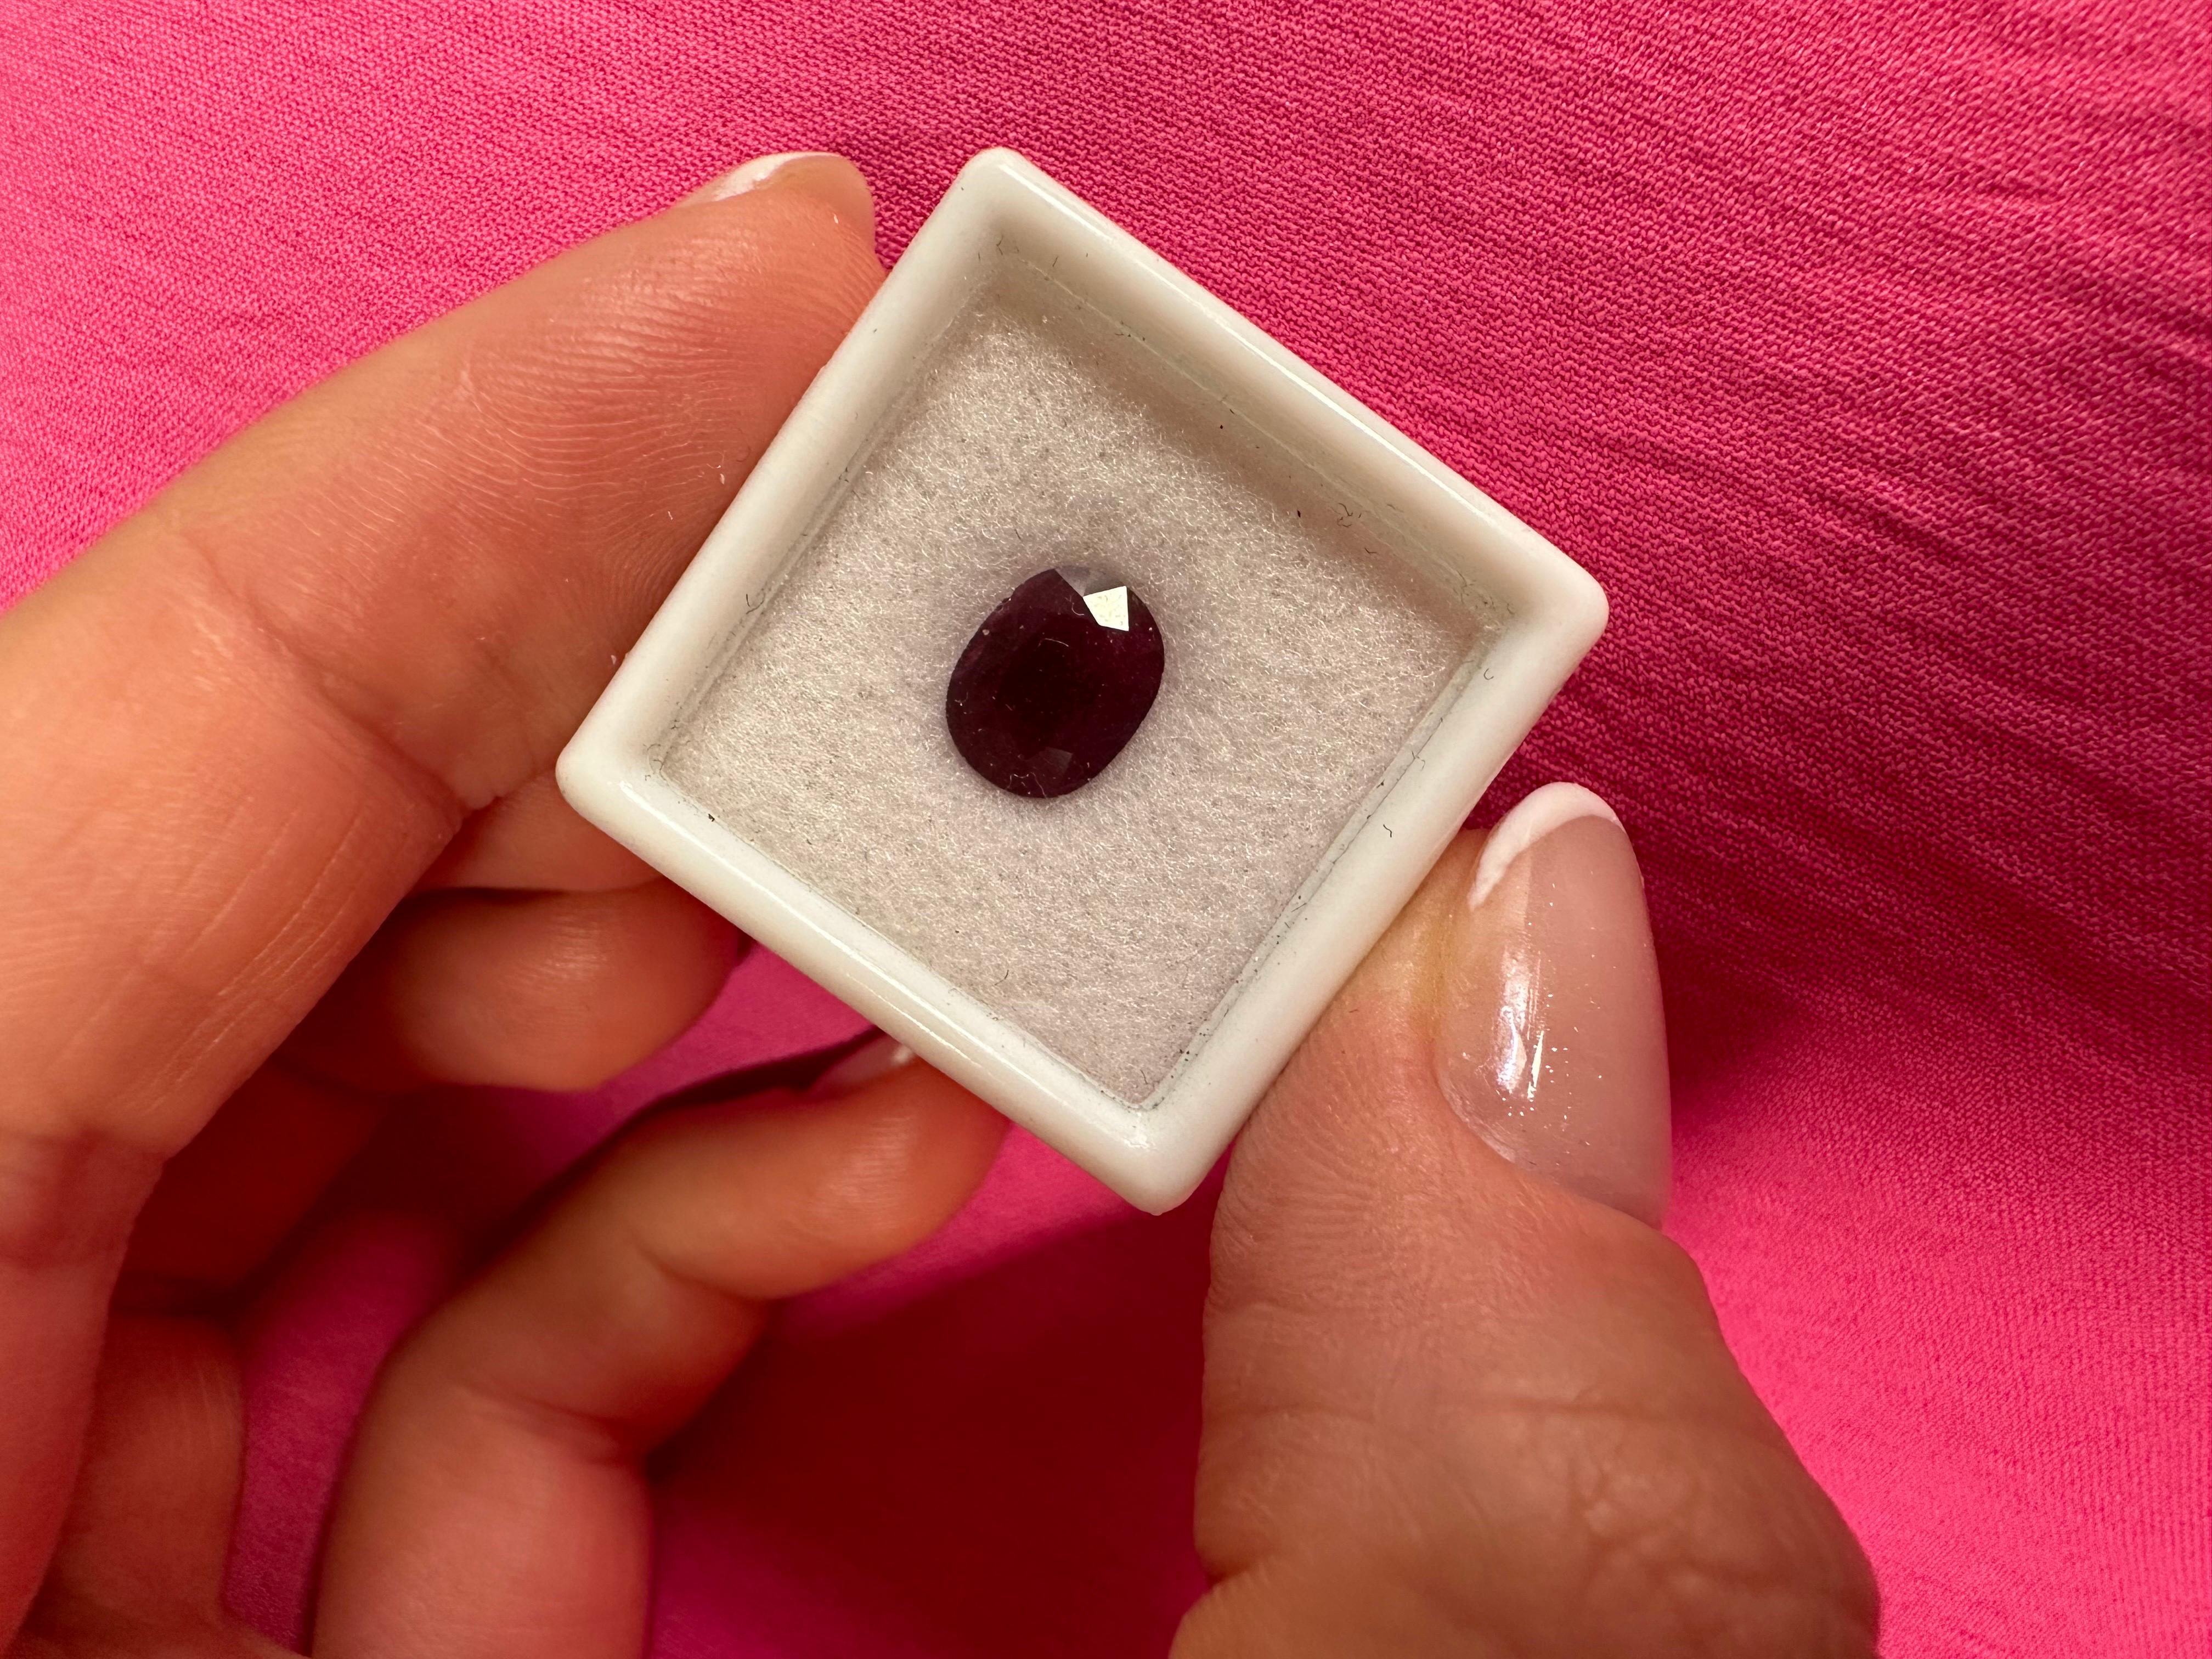 Unset loose ruby certified, will come with a box.

NATURAL GEMSTONE(S): RUBY
Clarity/Color: Slightly Included/Pinkish Red
Cut: Rectangular 9mm x 7.1mm
Treatment: heat only


WHAT YOU GET AT STAMPAR JEWELERS:
Stampar Jewelers, located in the heart of